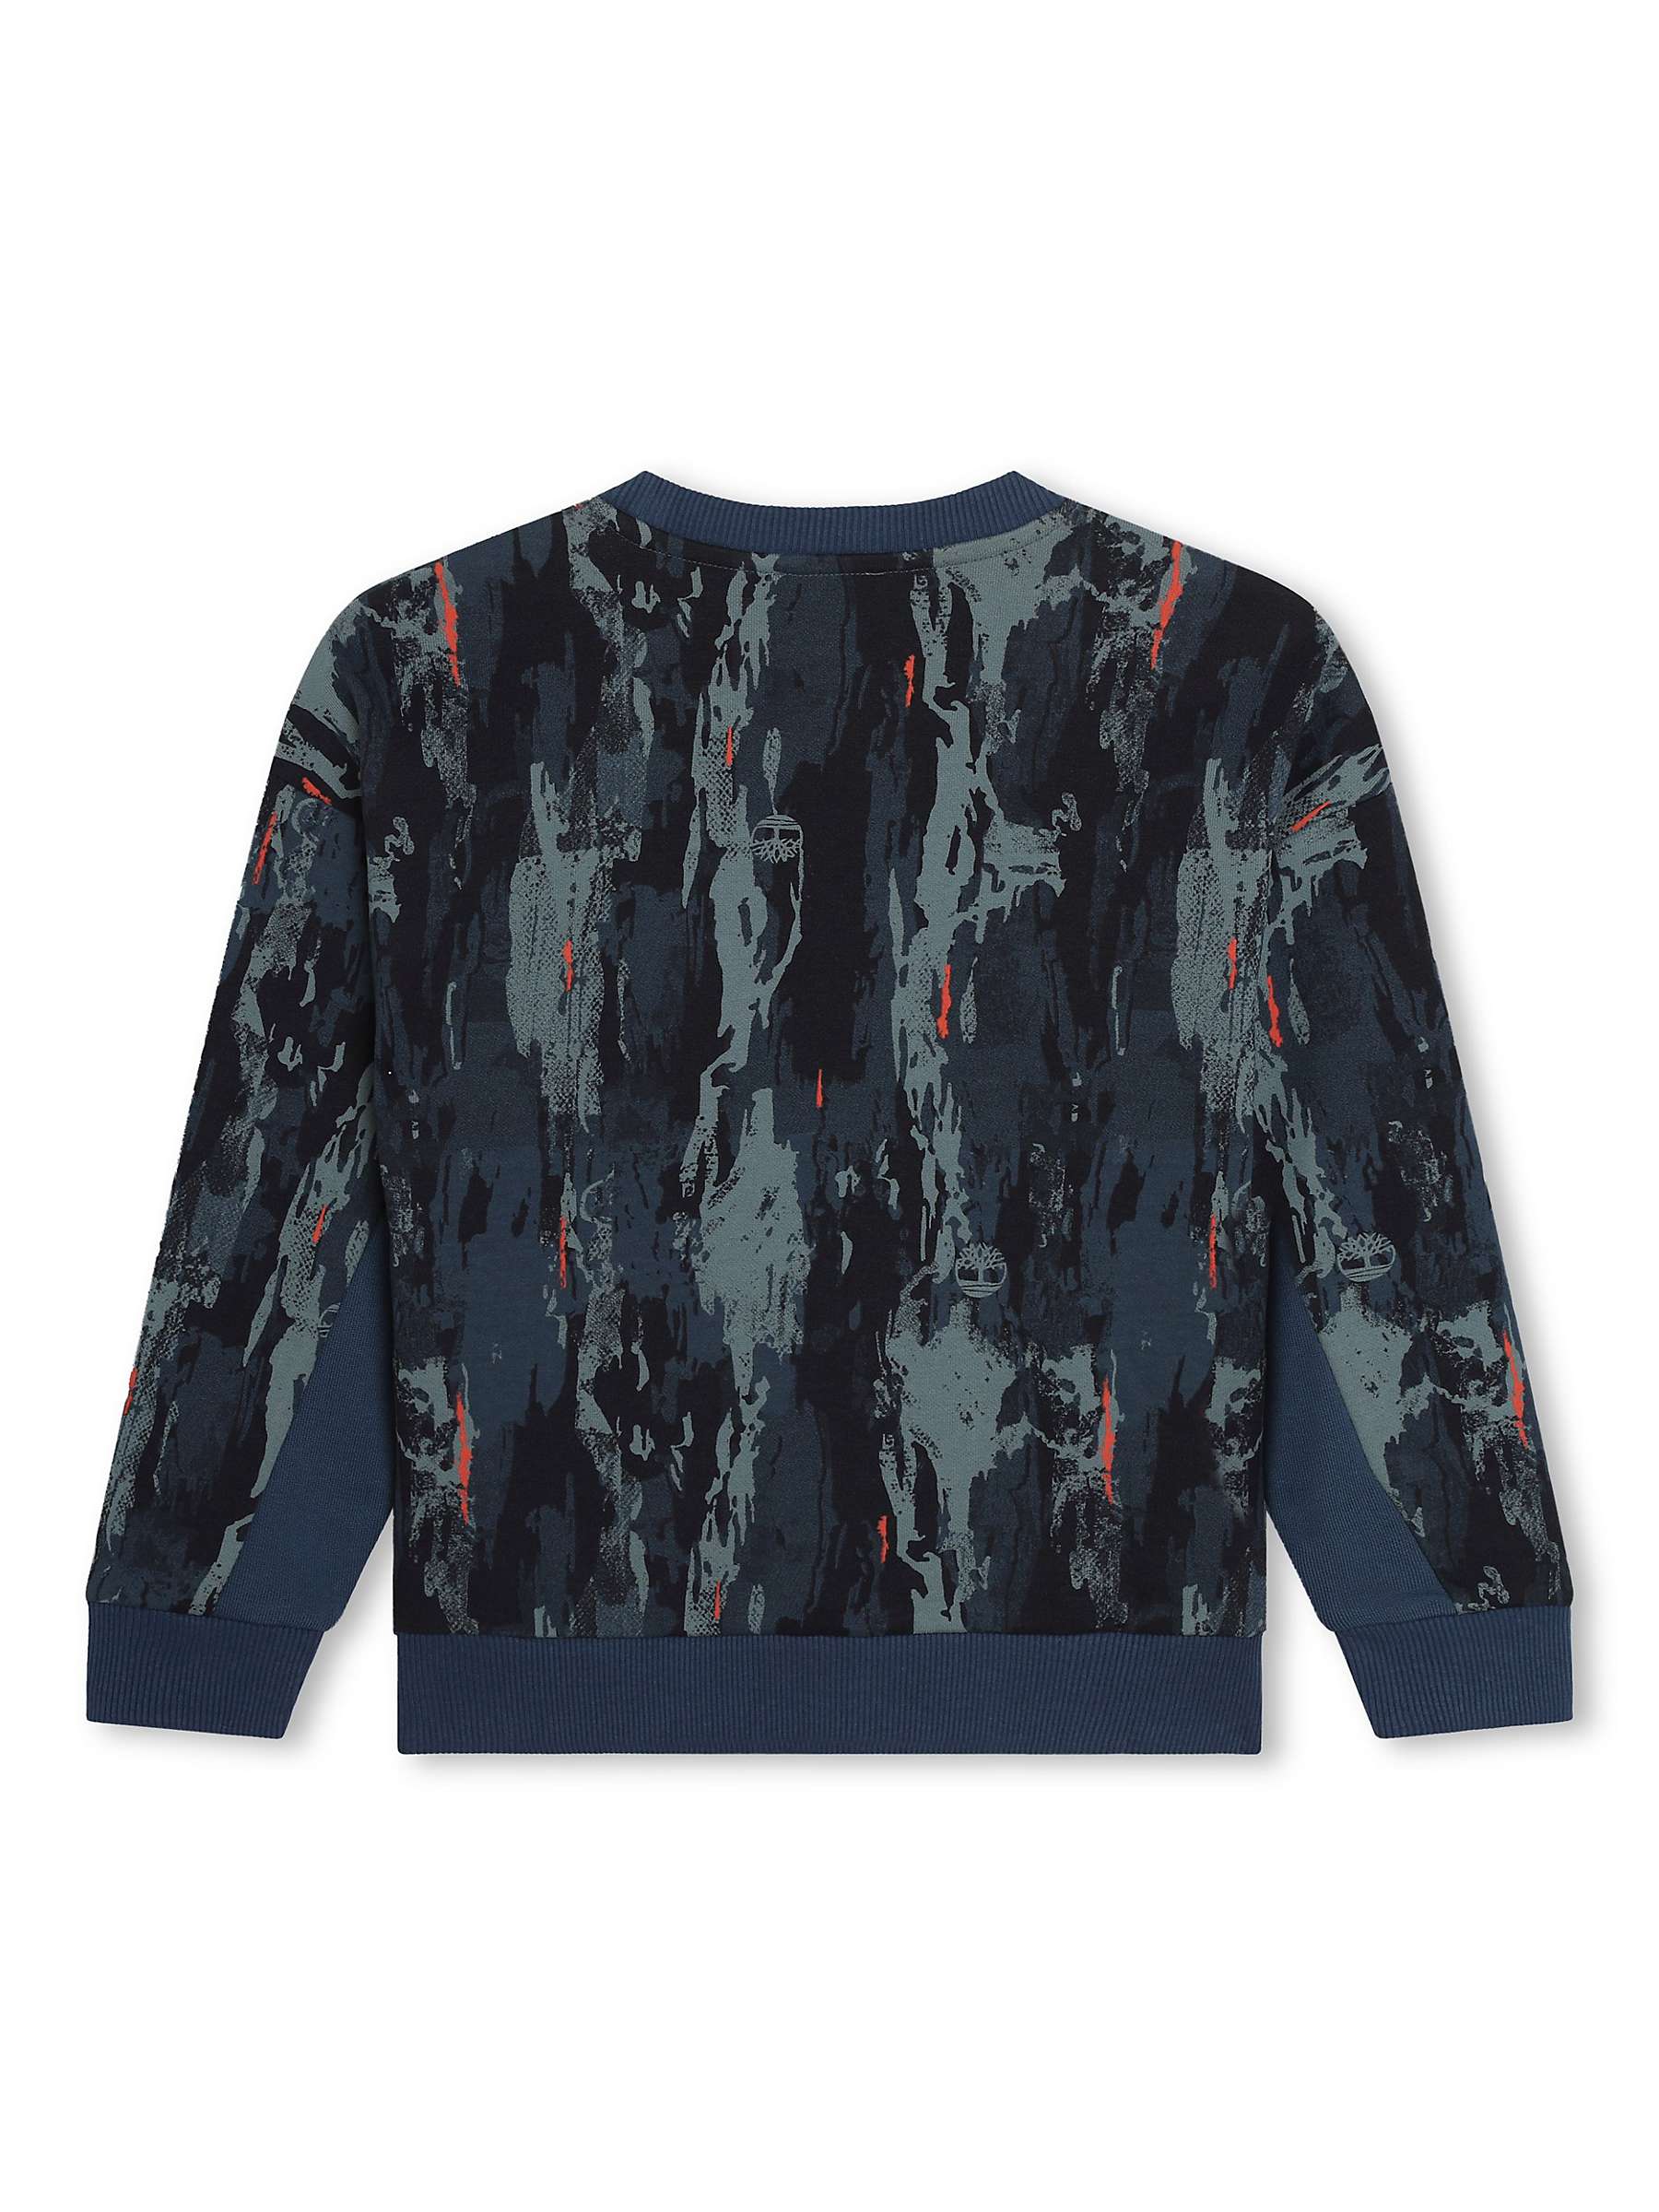 Buy Timberland Kids' Logo Abstract Print French Terry Sweatshirt, Multi Online at johnlewis.com